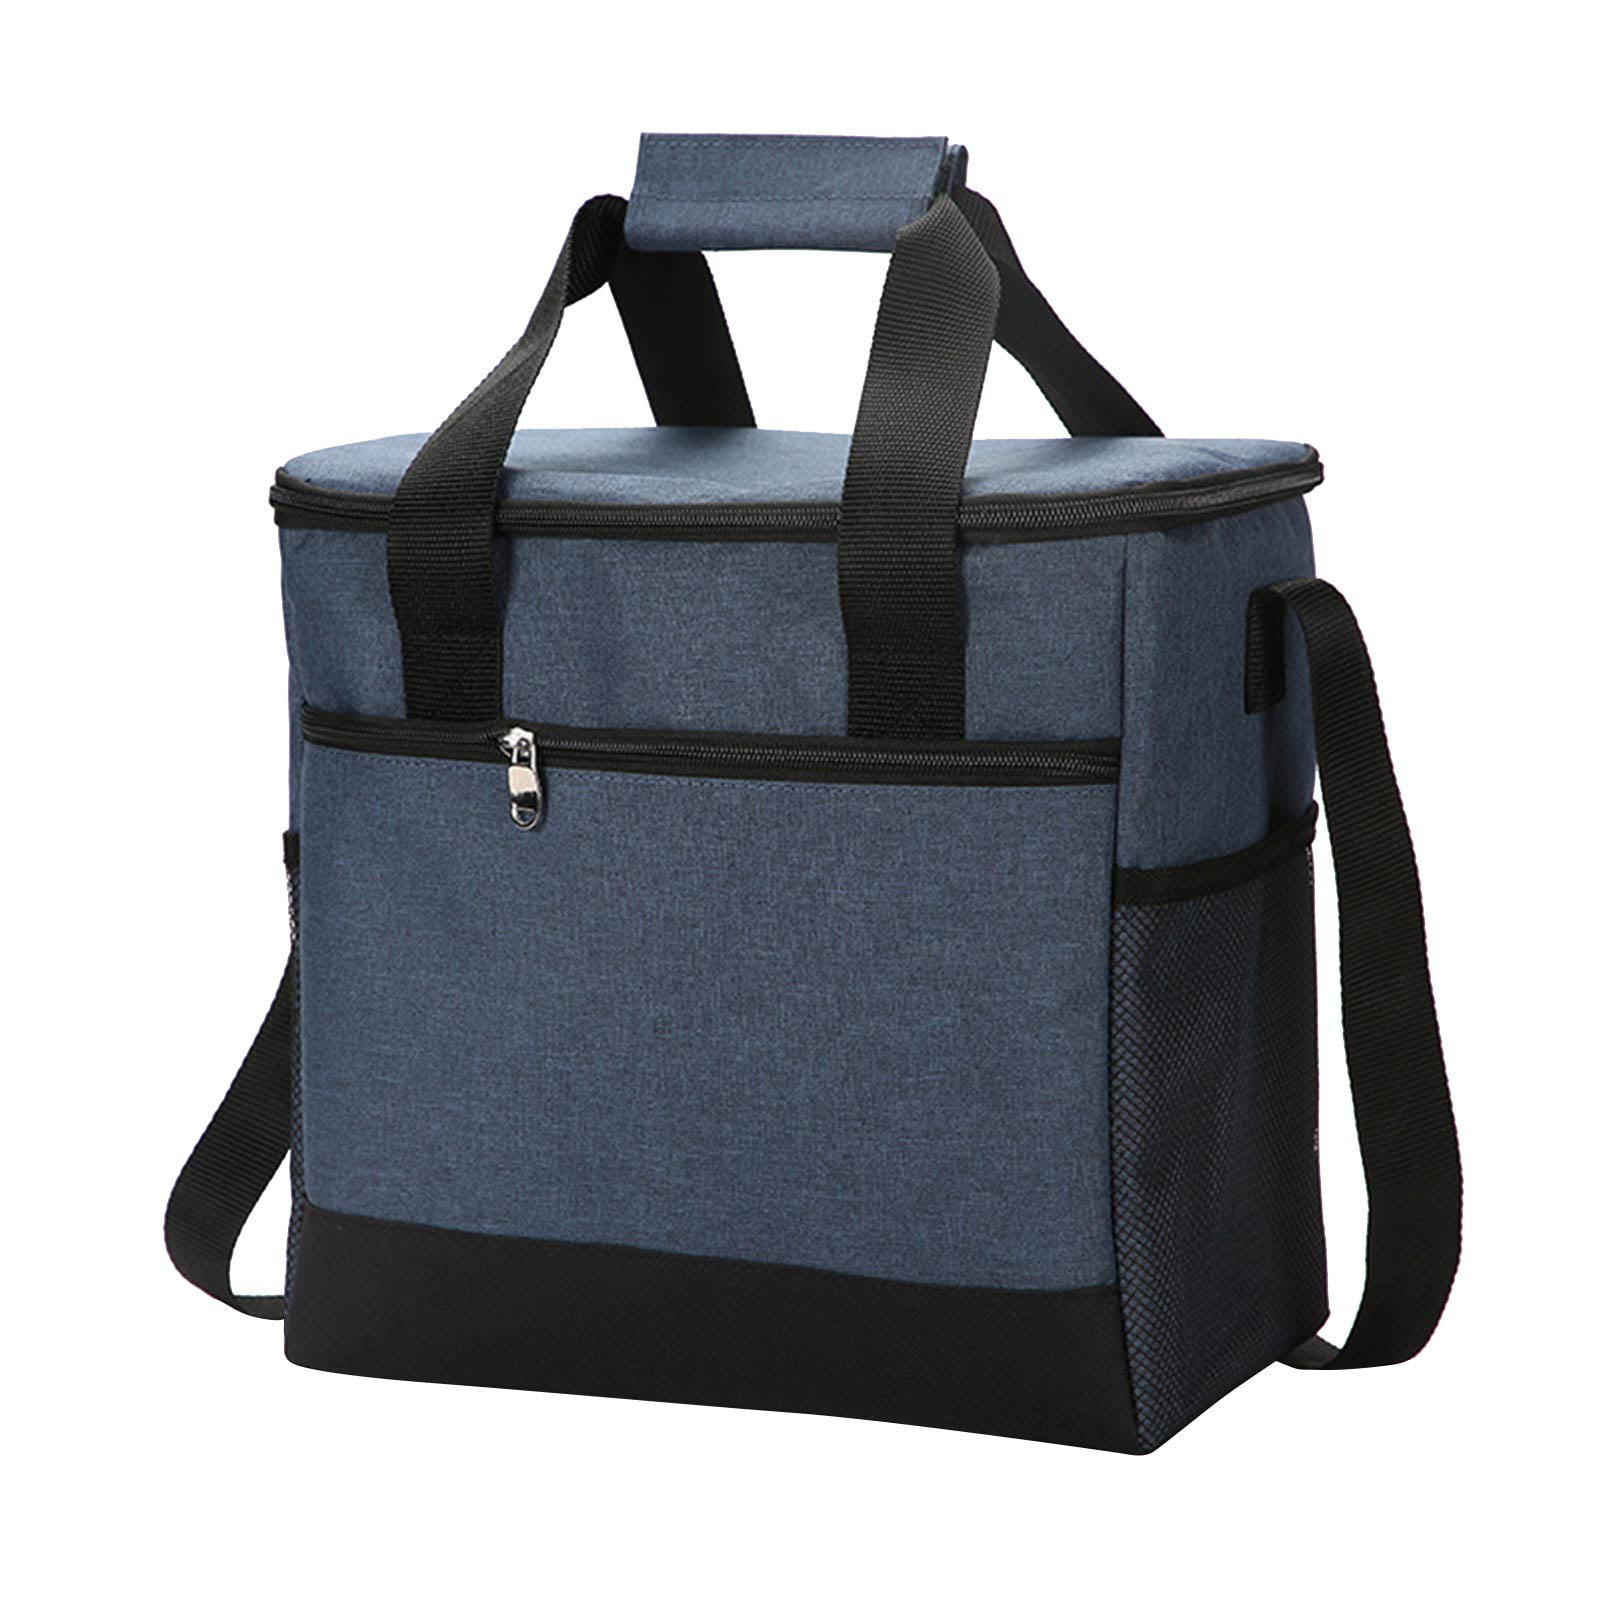 Details about   Double Layer Shoulder Bags Lunch Bag Insulated Cooler Bags Picnic Bag 